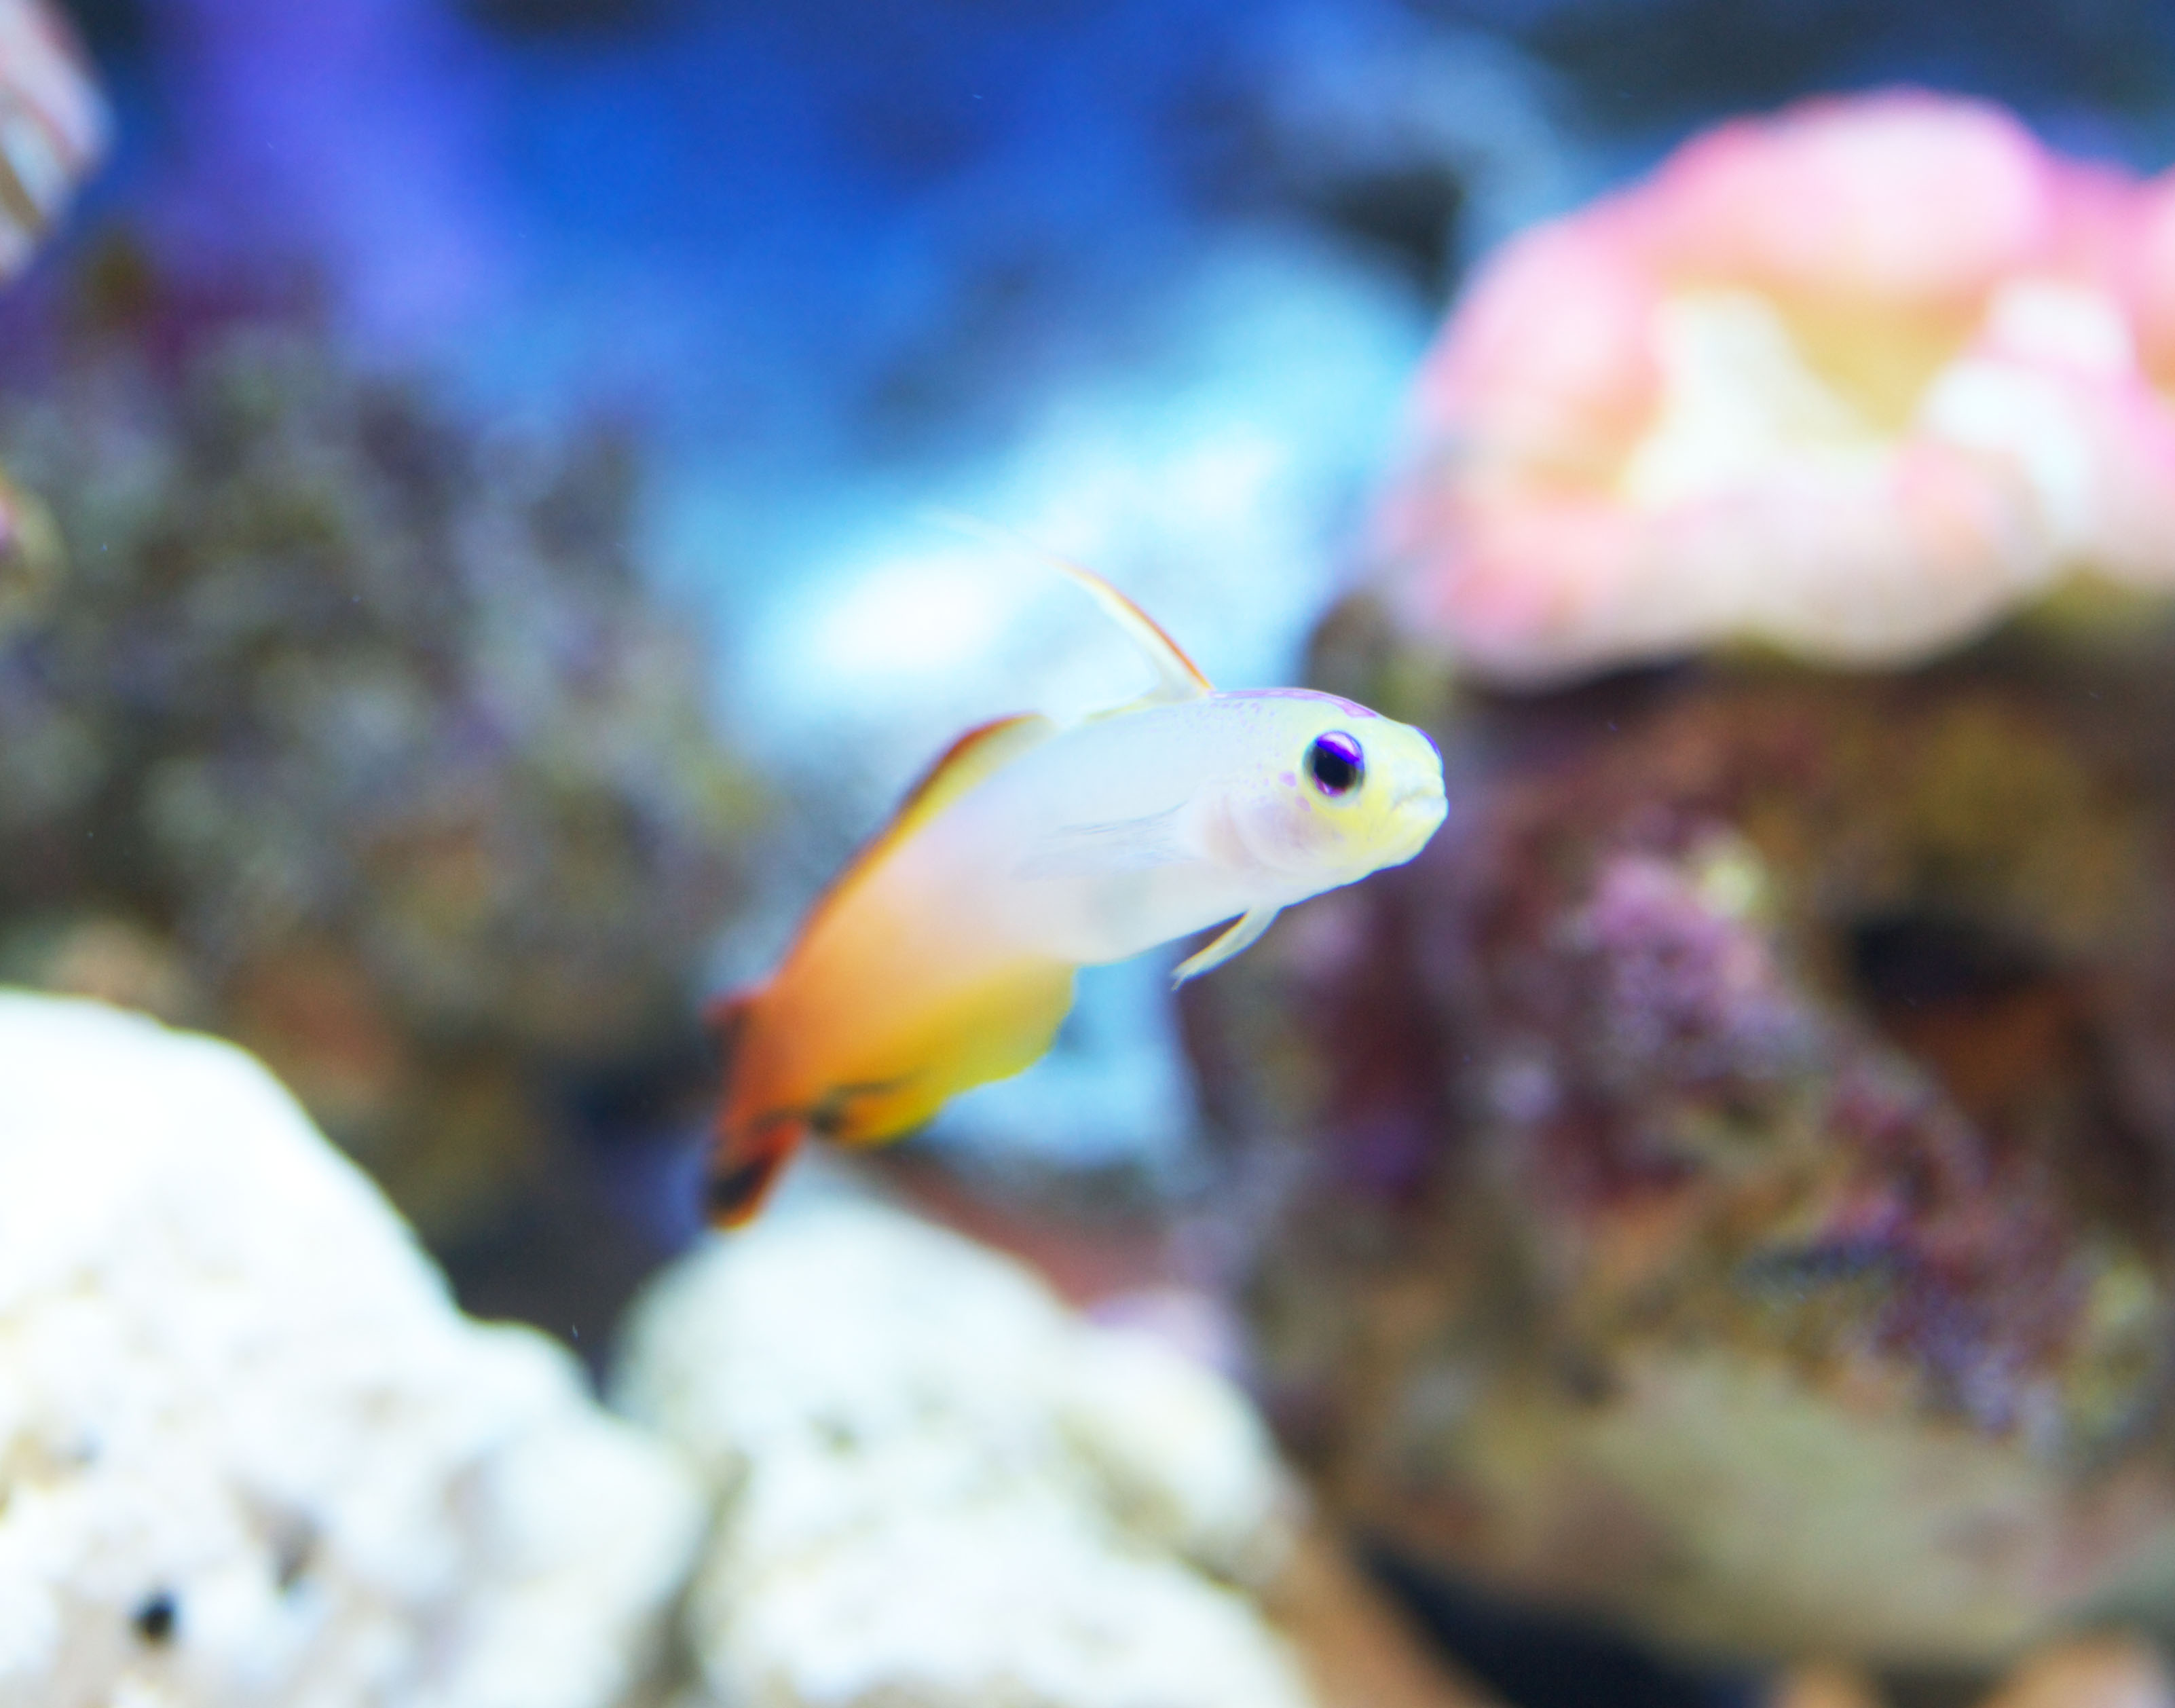 photo,material,free,landscape,picture,stock photo,Creative Commons,HATATATEHAZE, Tropical fish, Coral reef, Goby, Orange